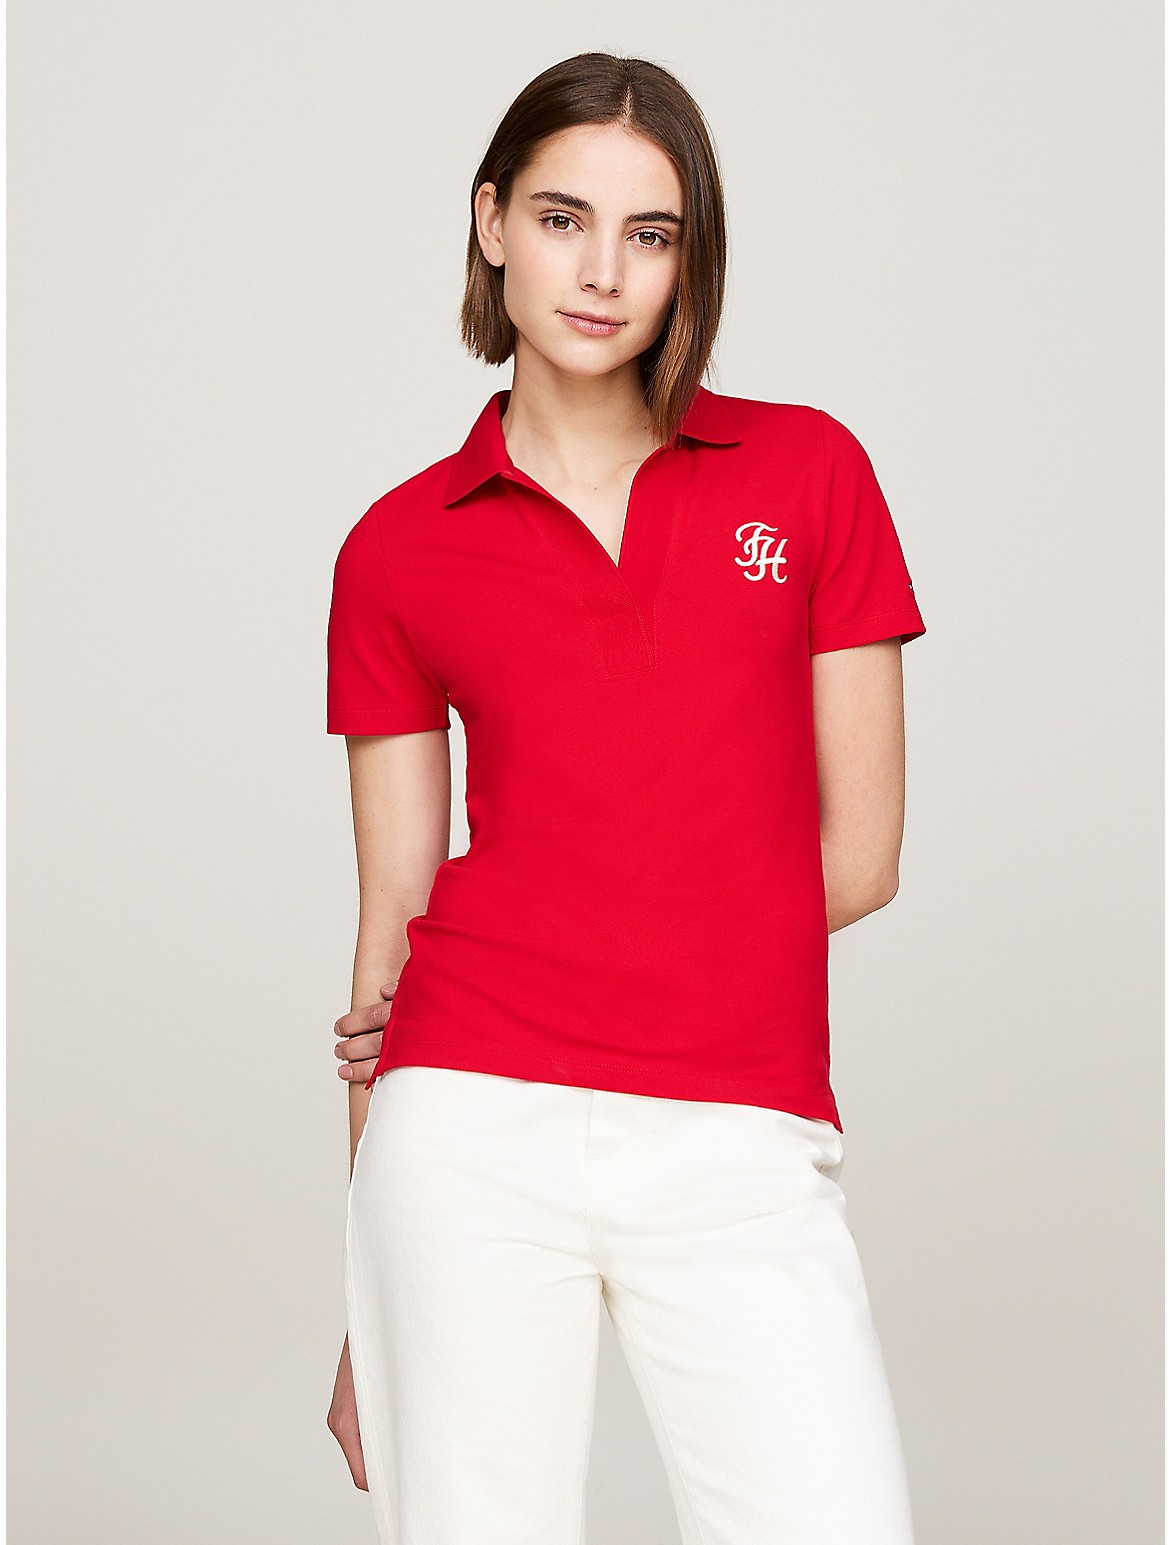 Tommy Hilfiger Women's Slim Fit Open-Neck Stretch Polo